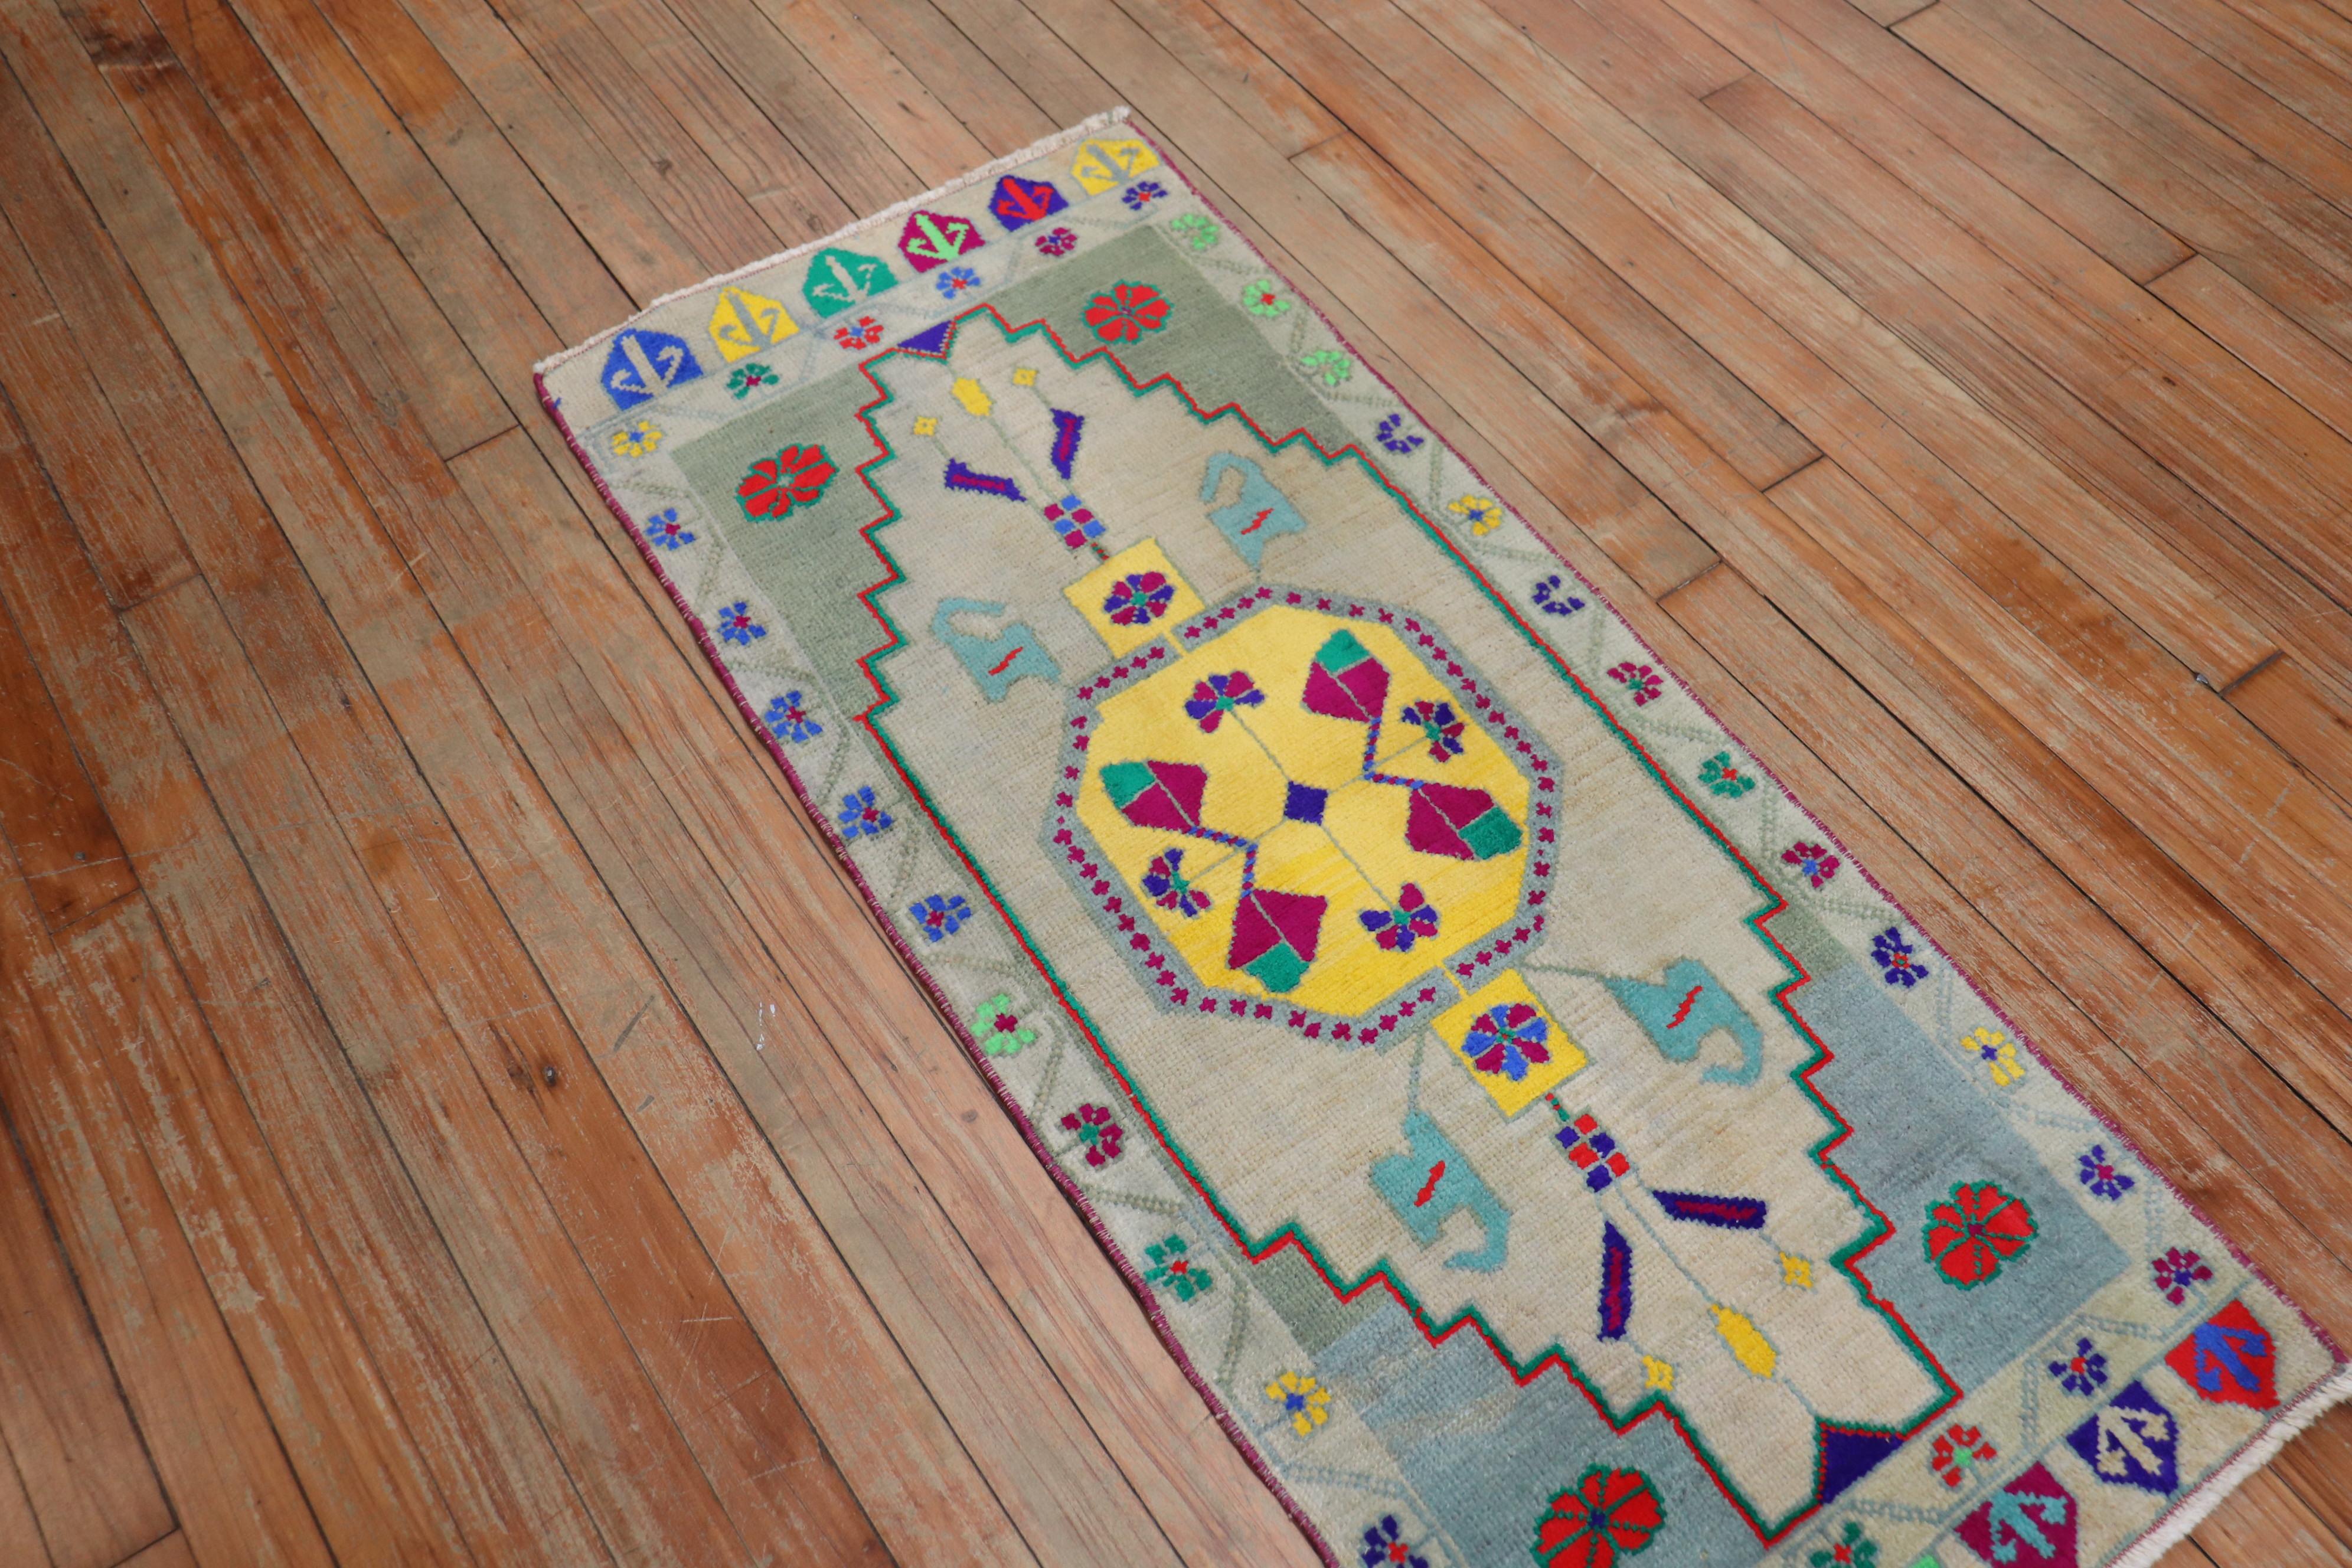 One of a kind vintage Turkish mat from the 20th century. All you got to do is look at the colors! A fun rug indeed

Measures: 1'8